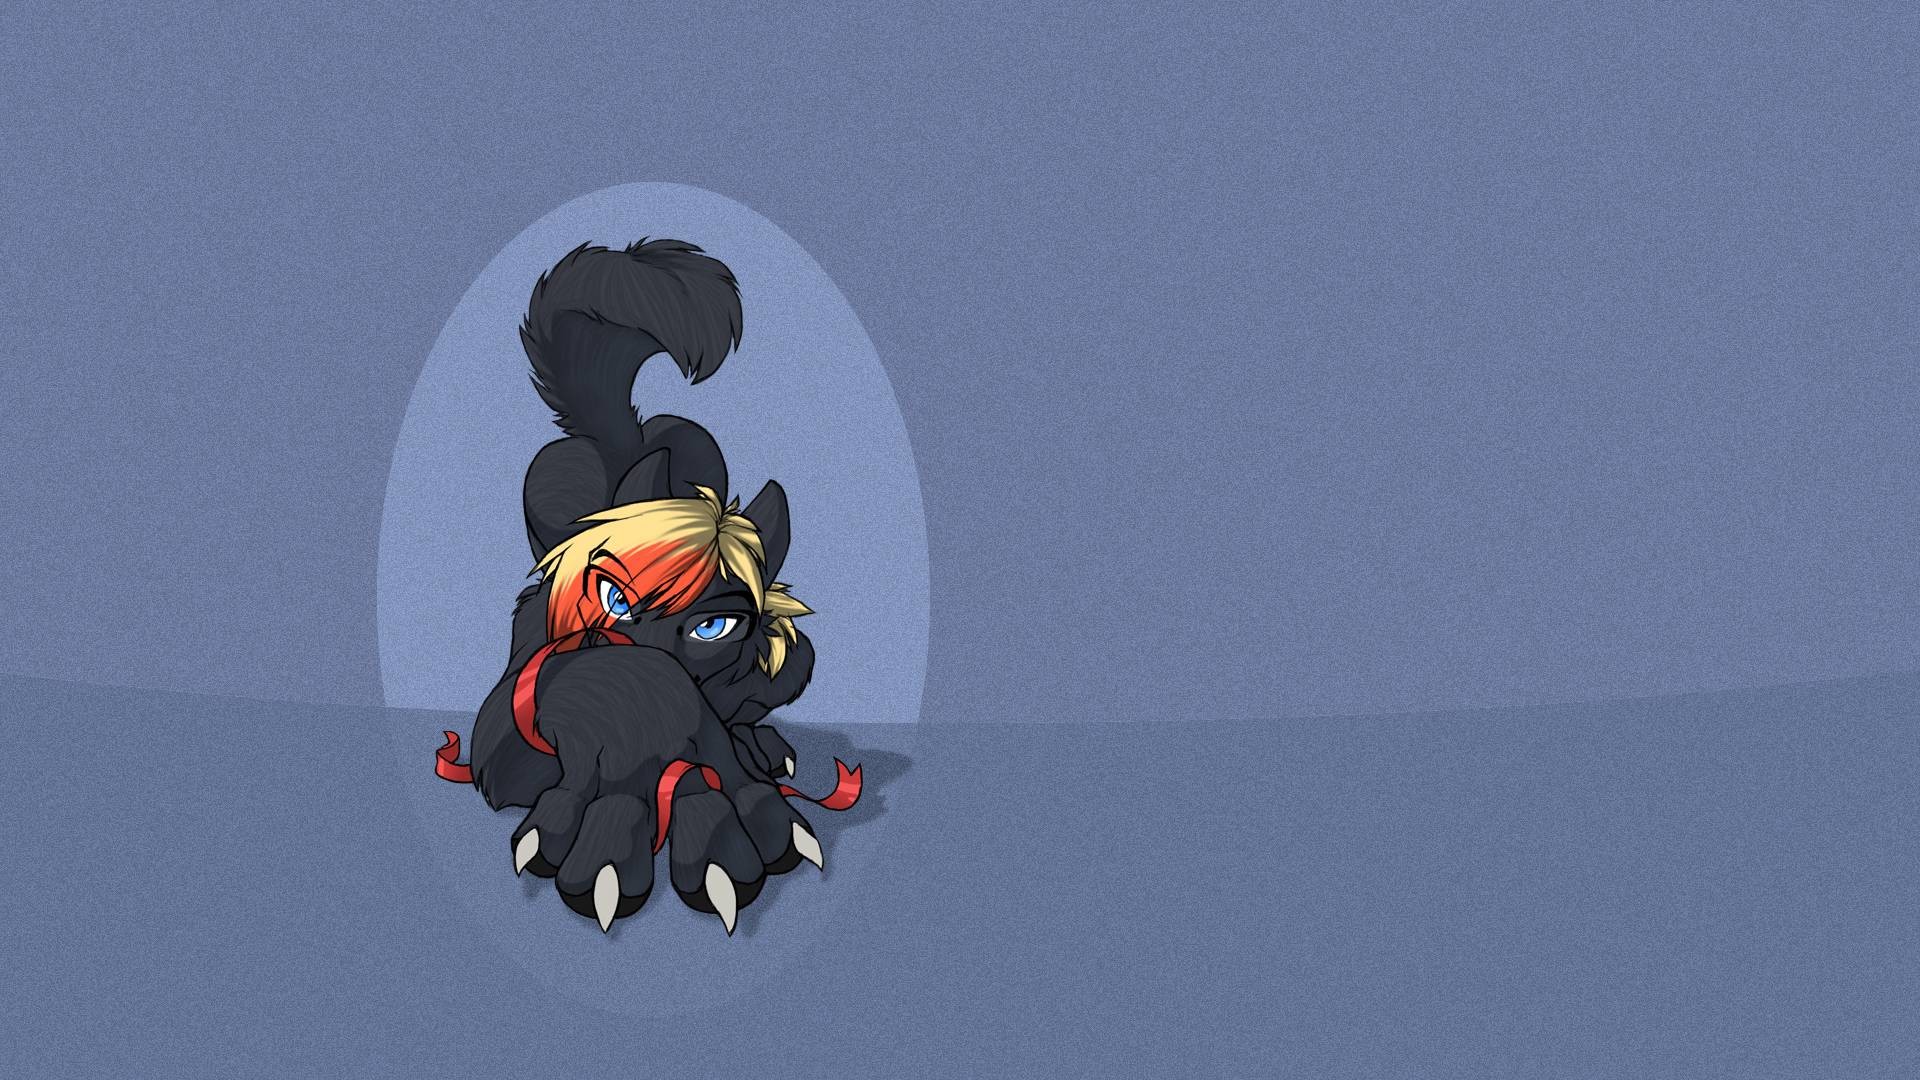 1920x1080 Furry Wallpaper Images & Pictures - Becuo